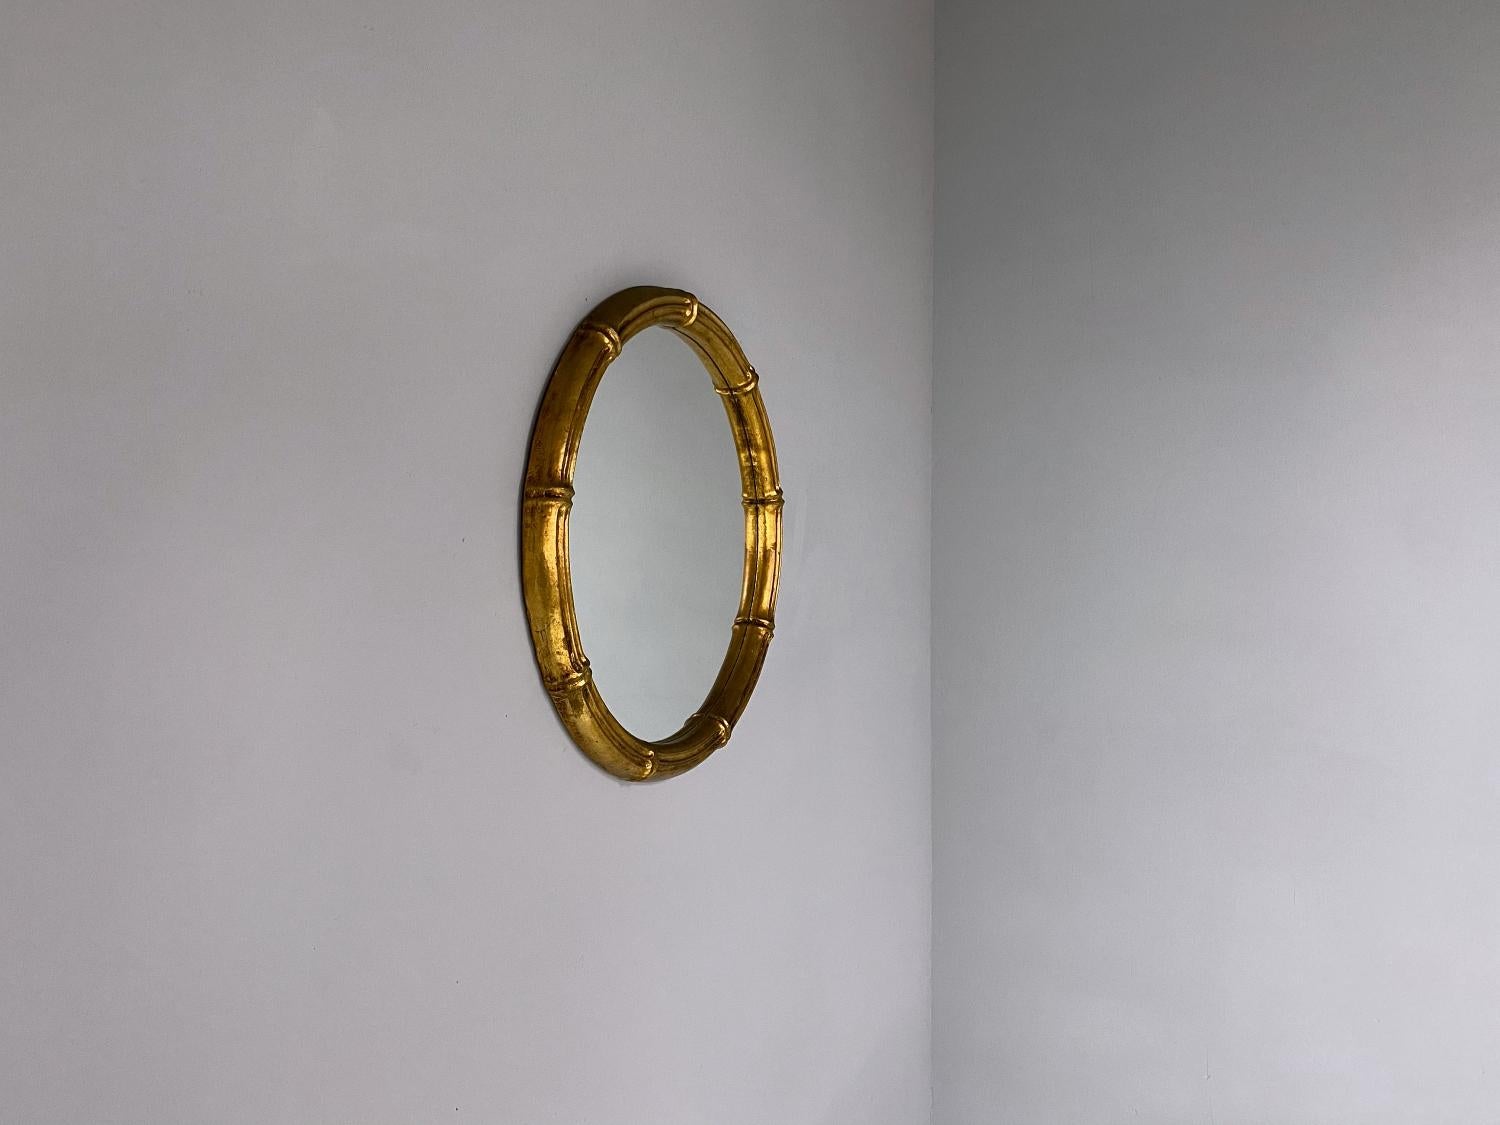 Hand-Crafted Max Welz Giltwood Faux Bamboo Wall Mirror, 1940s, Austria For Sale